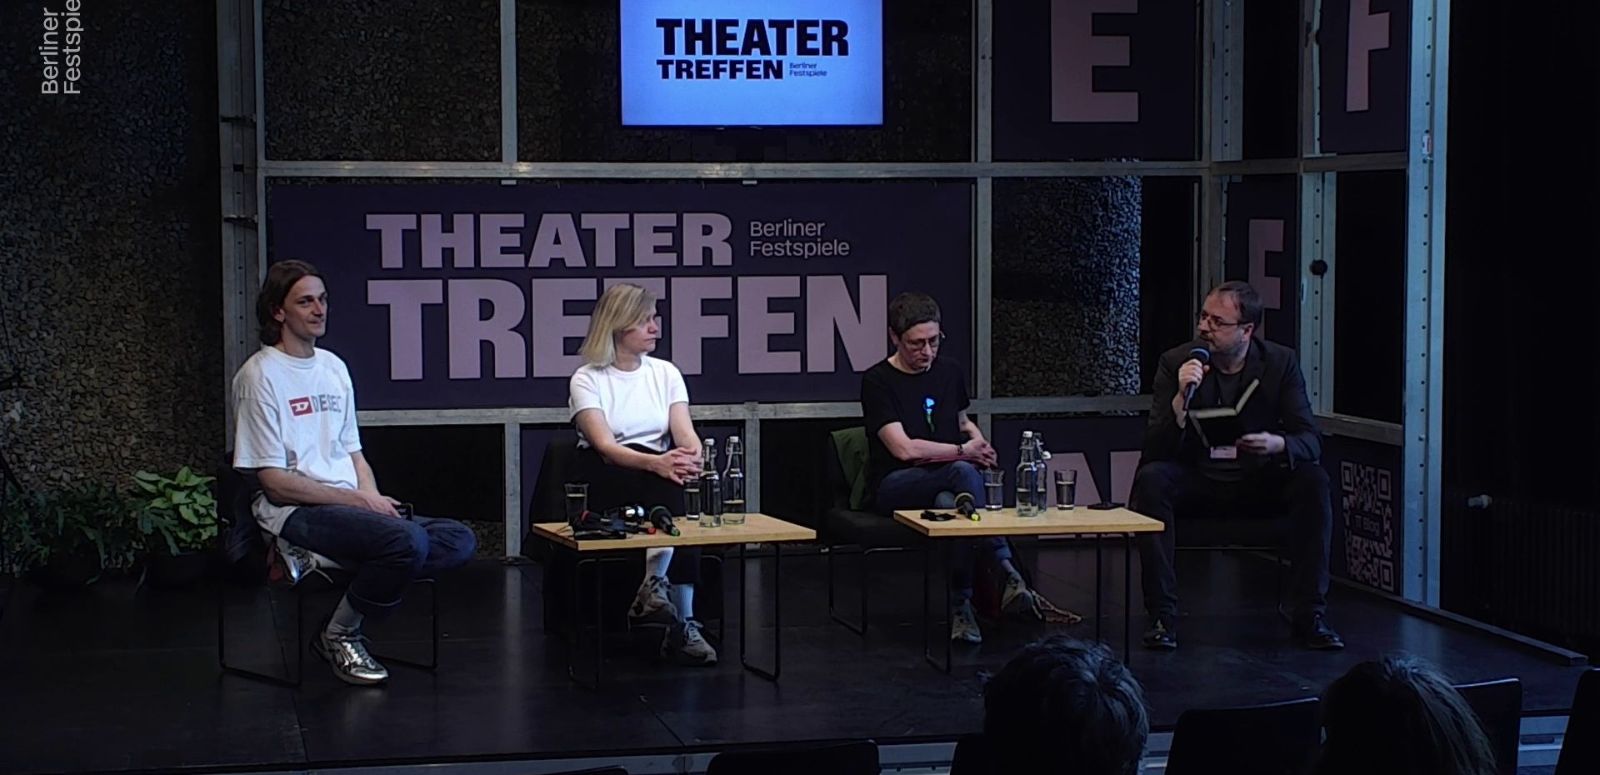 Two women and two men are sitting around a small table, behind them the lettering Theatertreffen. The man on the far right has a microphone in his hand.